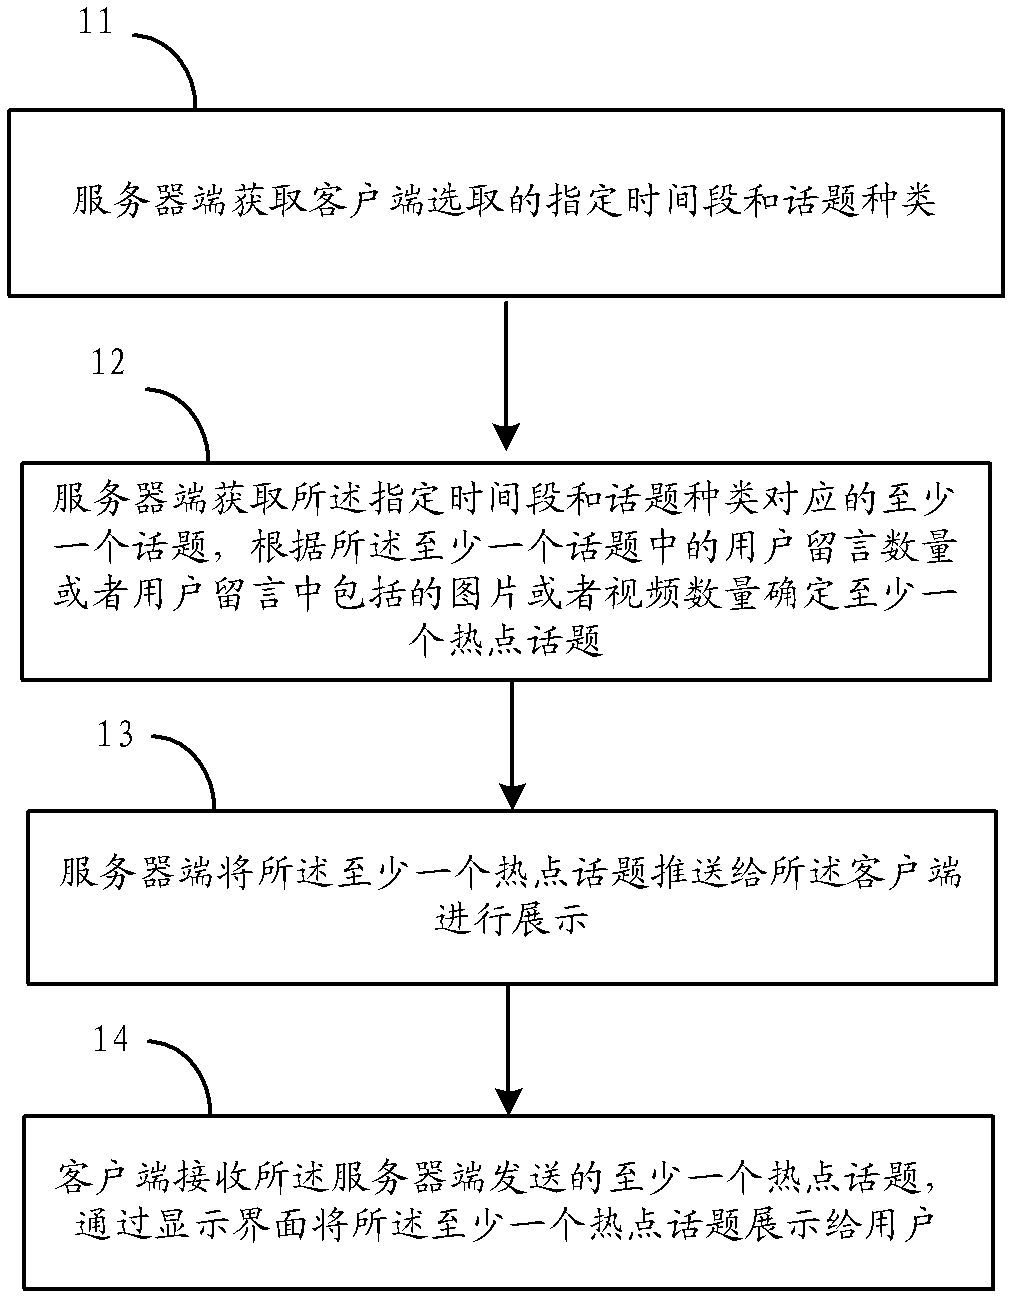 Network information processing method and device